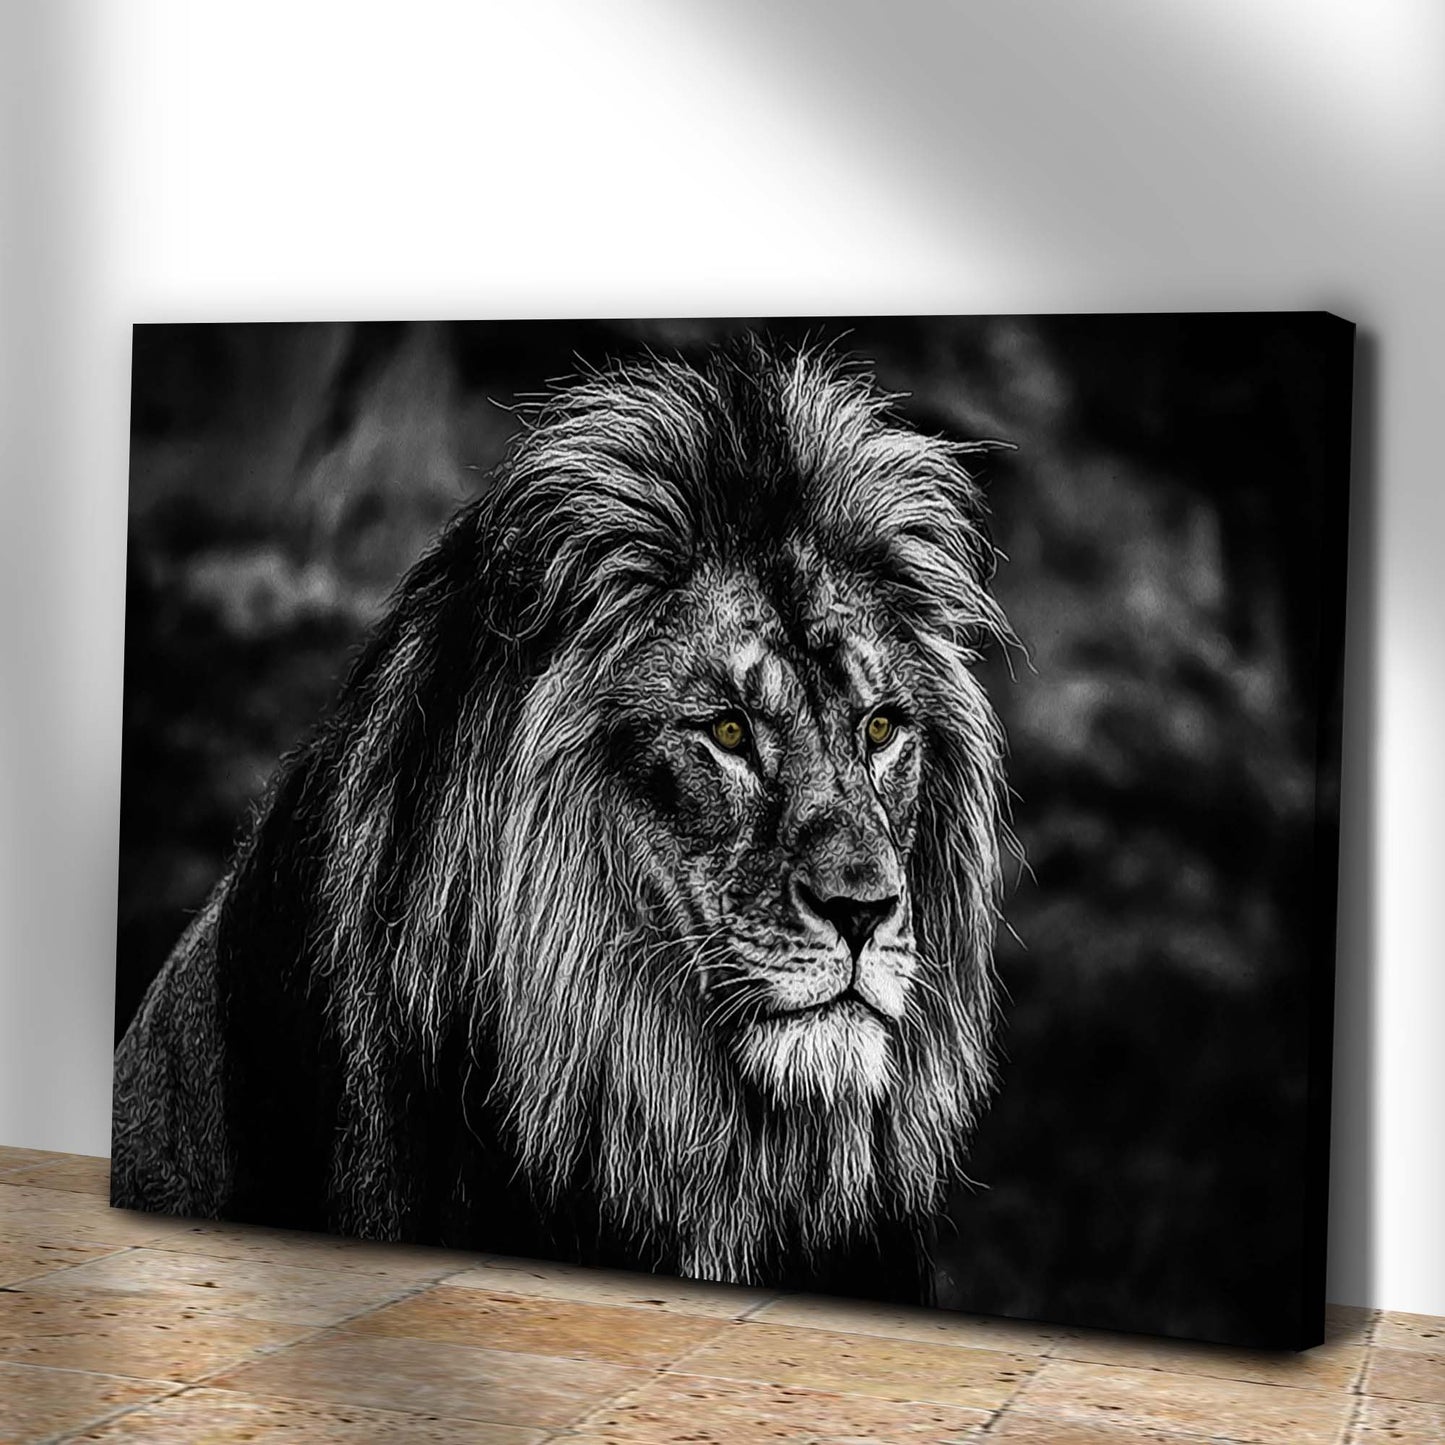 Black and White Golden-Eyed Lion Canvas Wall Art Style 2 - Image by Tailored Canvases